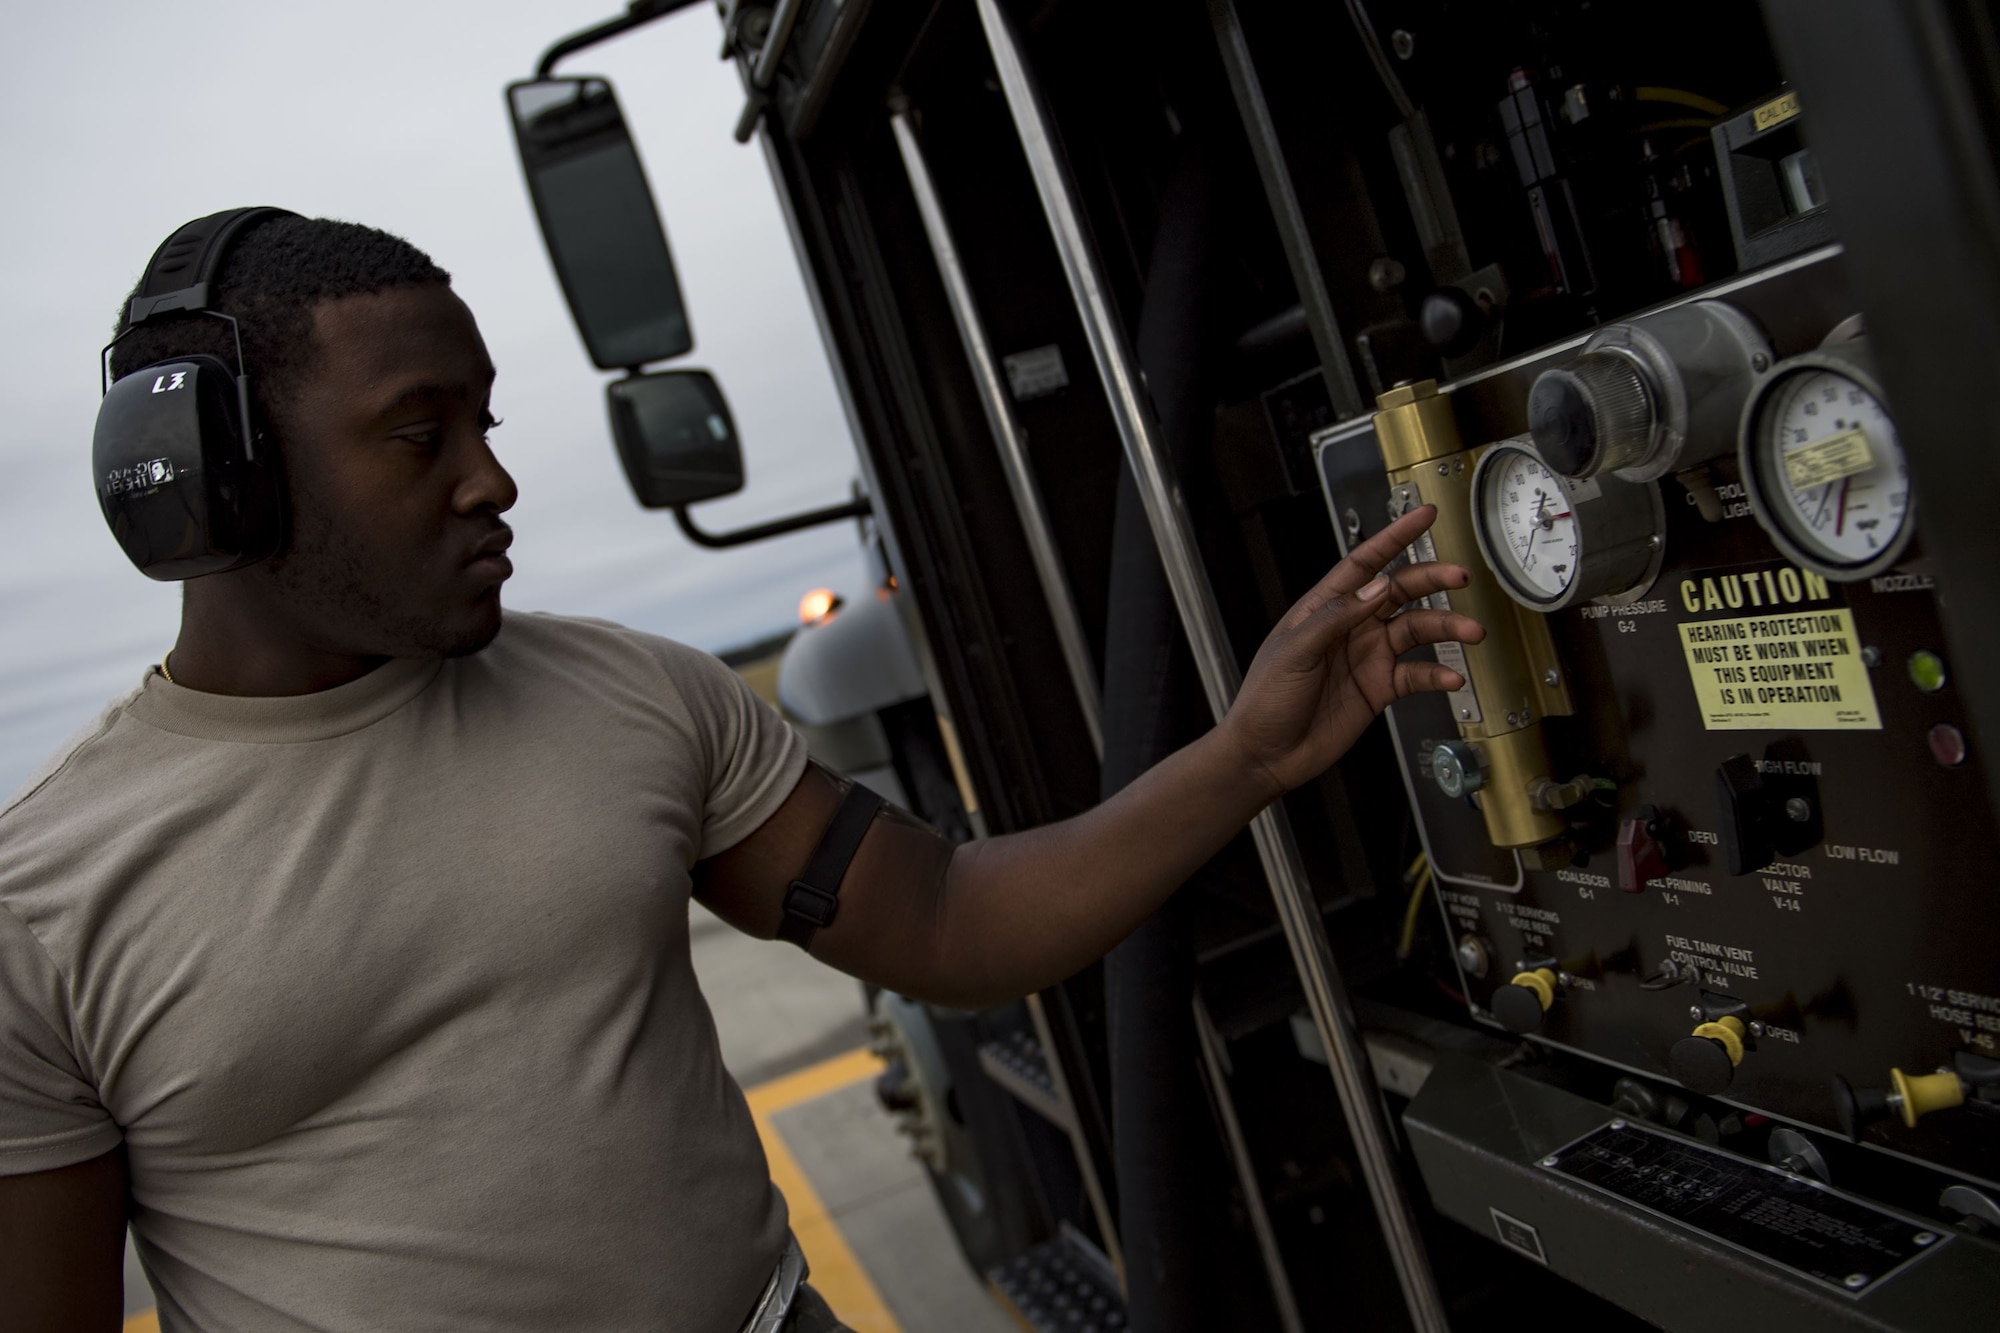 Airman 1st Class Ramauro Bey, 23d Logistics Readiness Squadron fuels distribution operator, monitors the settings on a R-11 refueling truck during a hot-pit refuel of an A-10C Thunderbolt II, Dec. 8, 2017, at Moody Air Force Base, Ga. Team Moody uses this style of refueling to eliminate the need of extra maintenance and to extend pilot’s training time per flight. (U.S. Air Force photo by Senior Airman Daniel Snider)